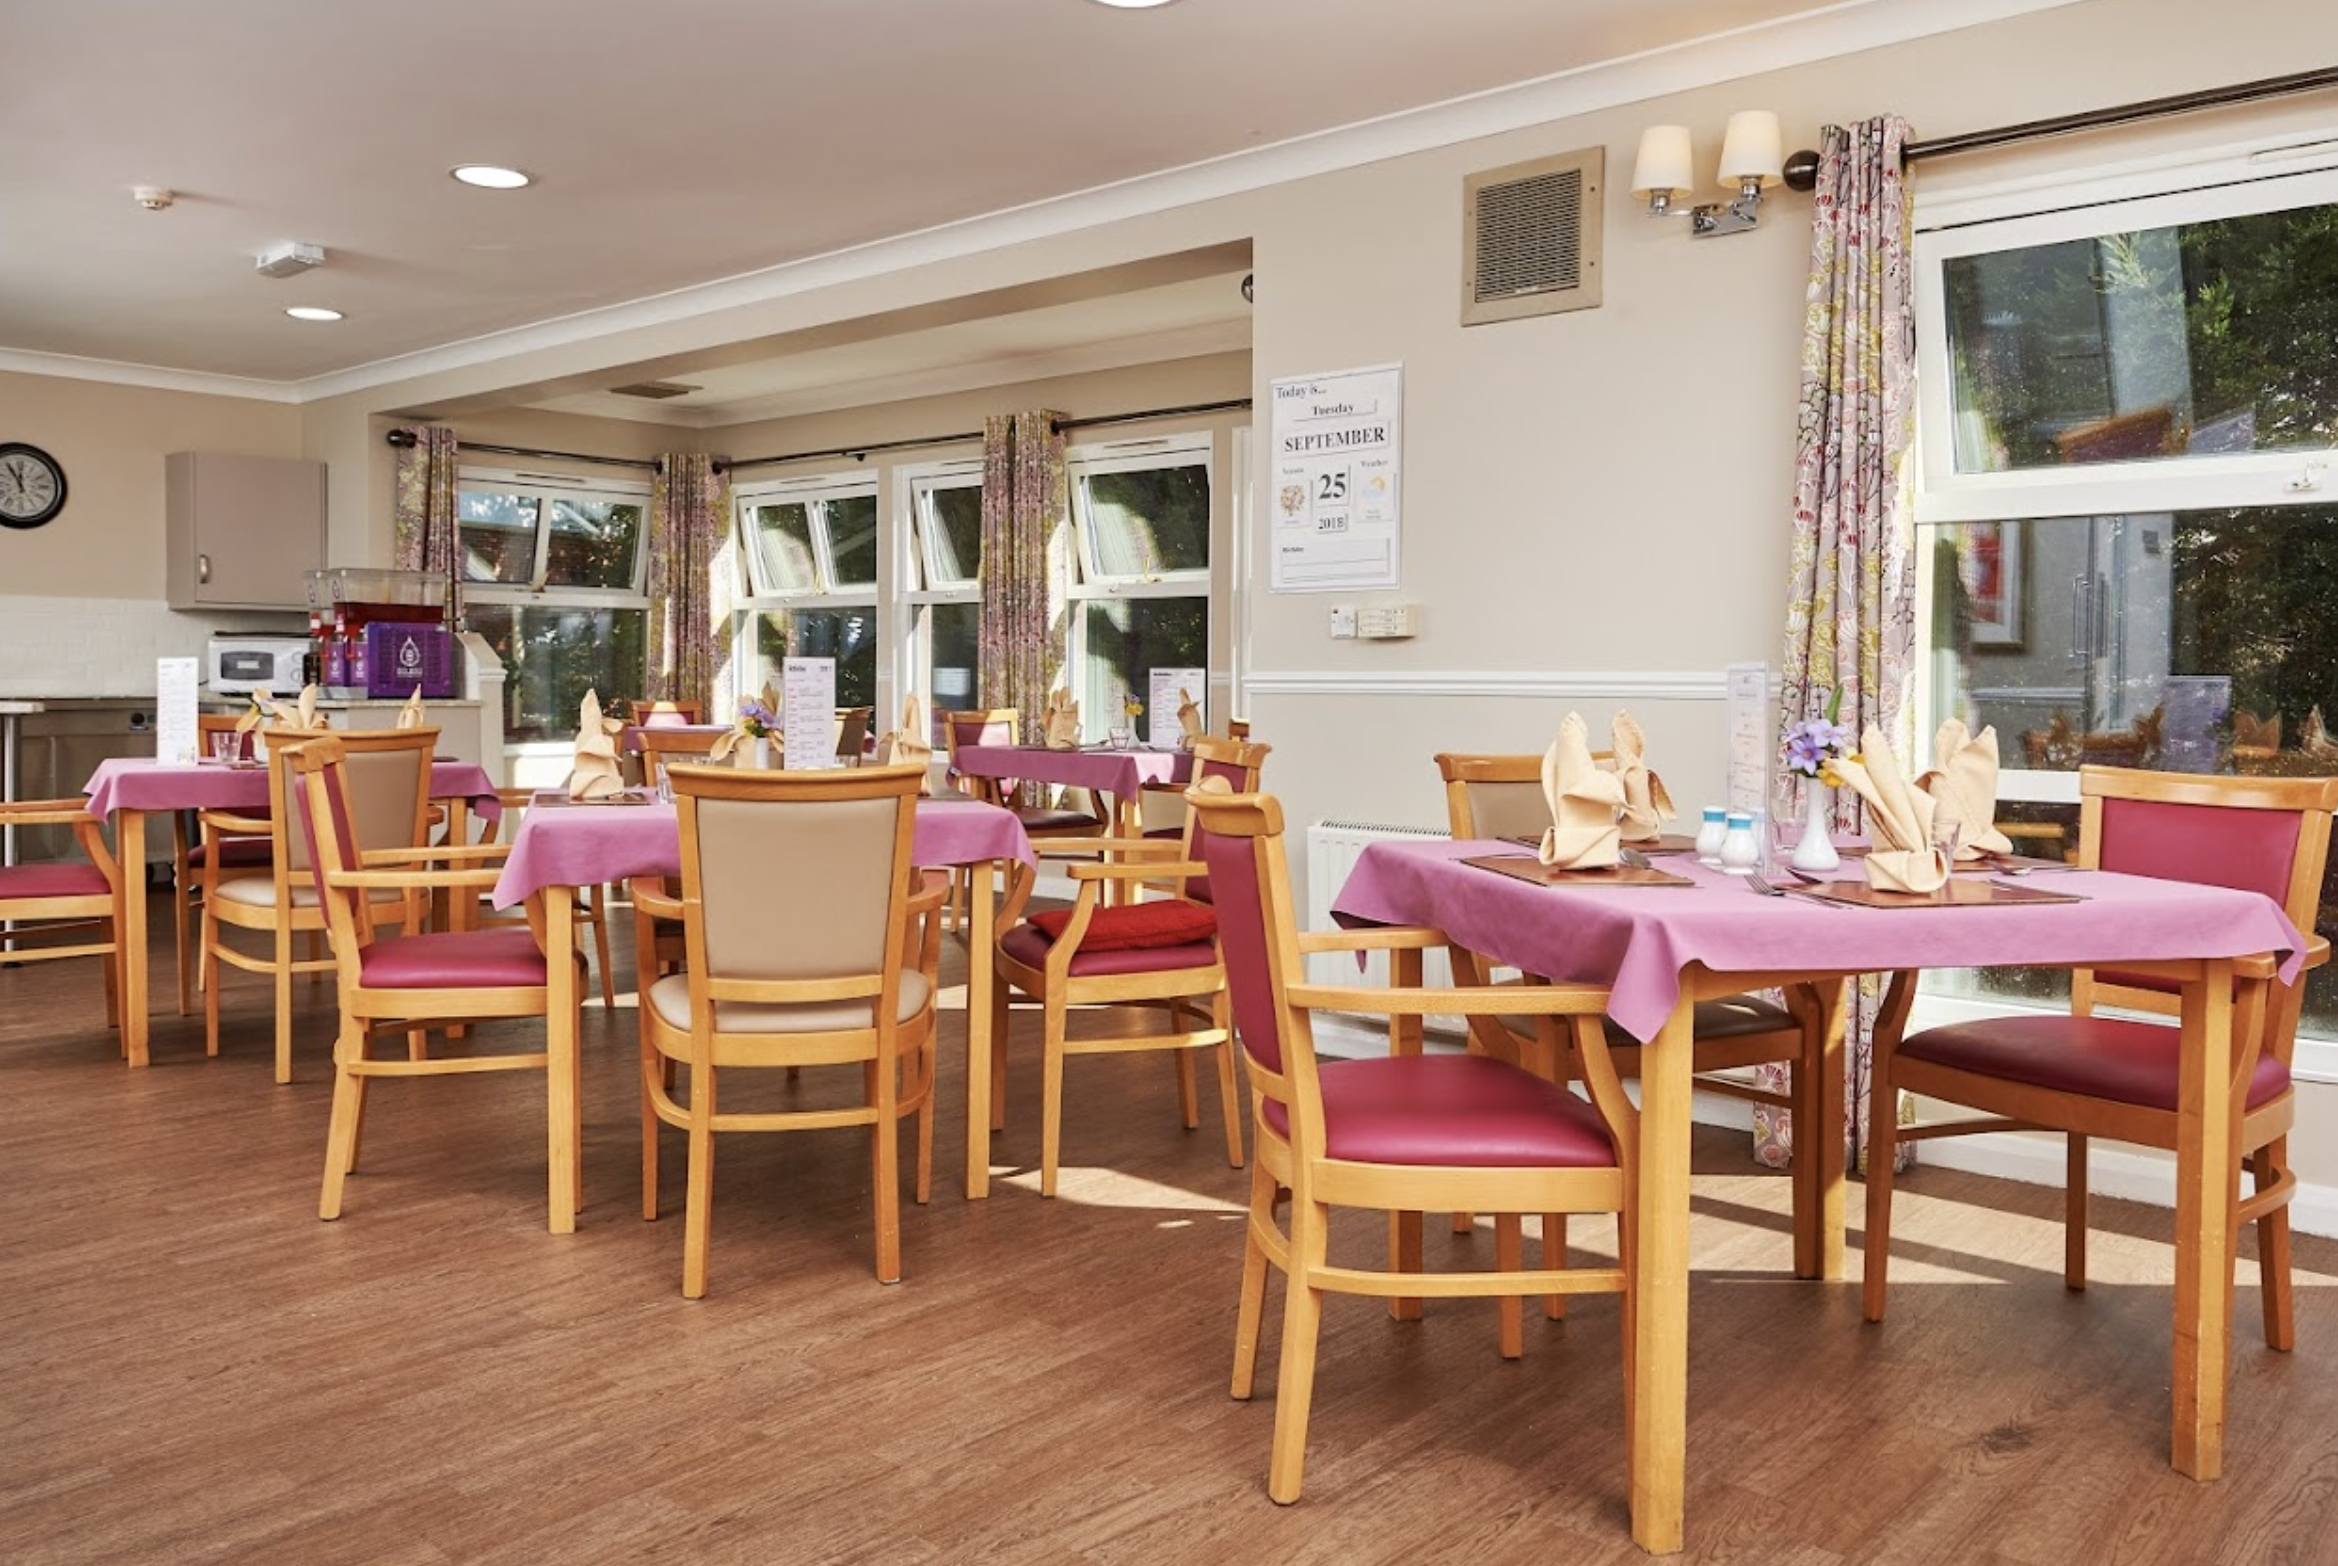 Dining room of Whitefarm Lodge Care Home in Twickenham, Richmond upon Thames